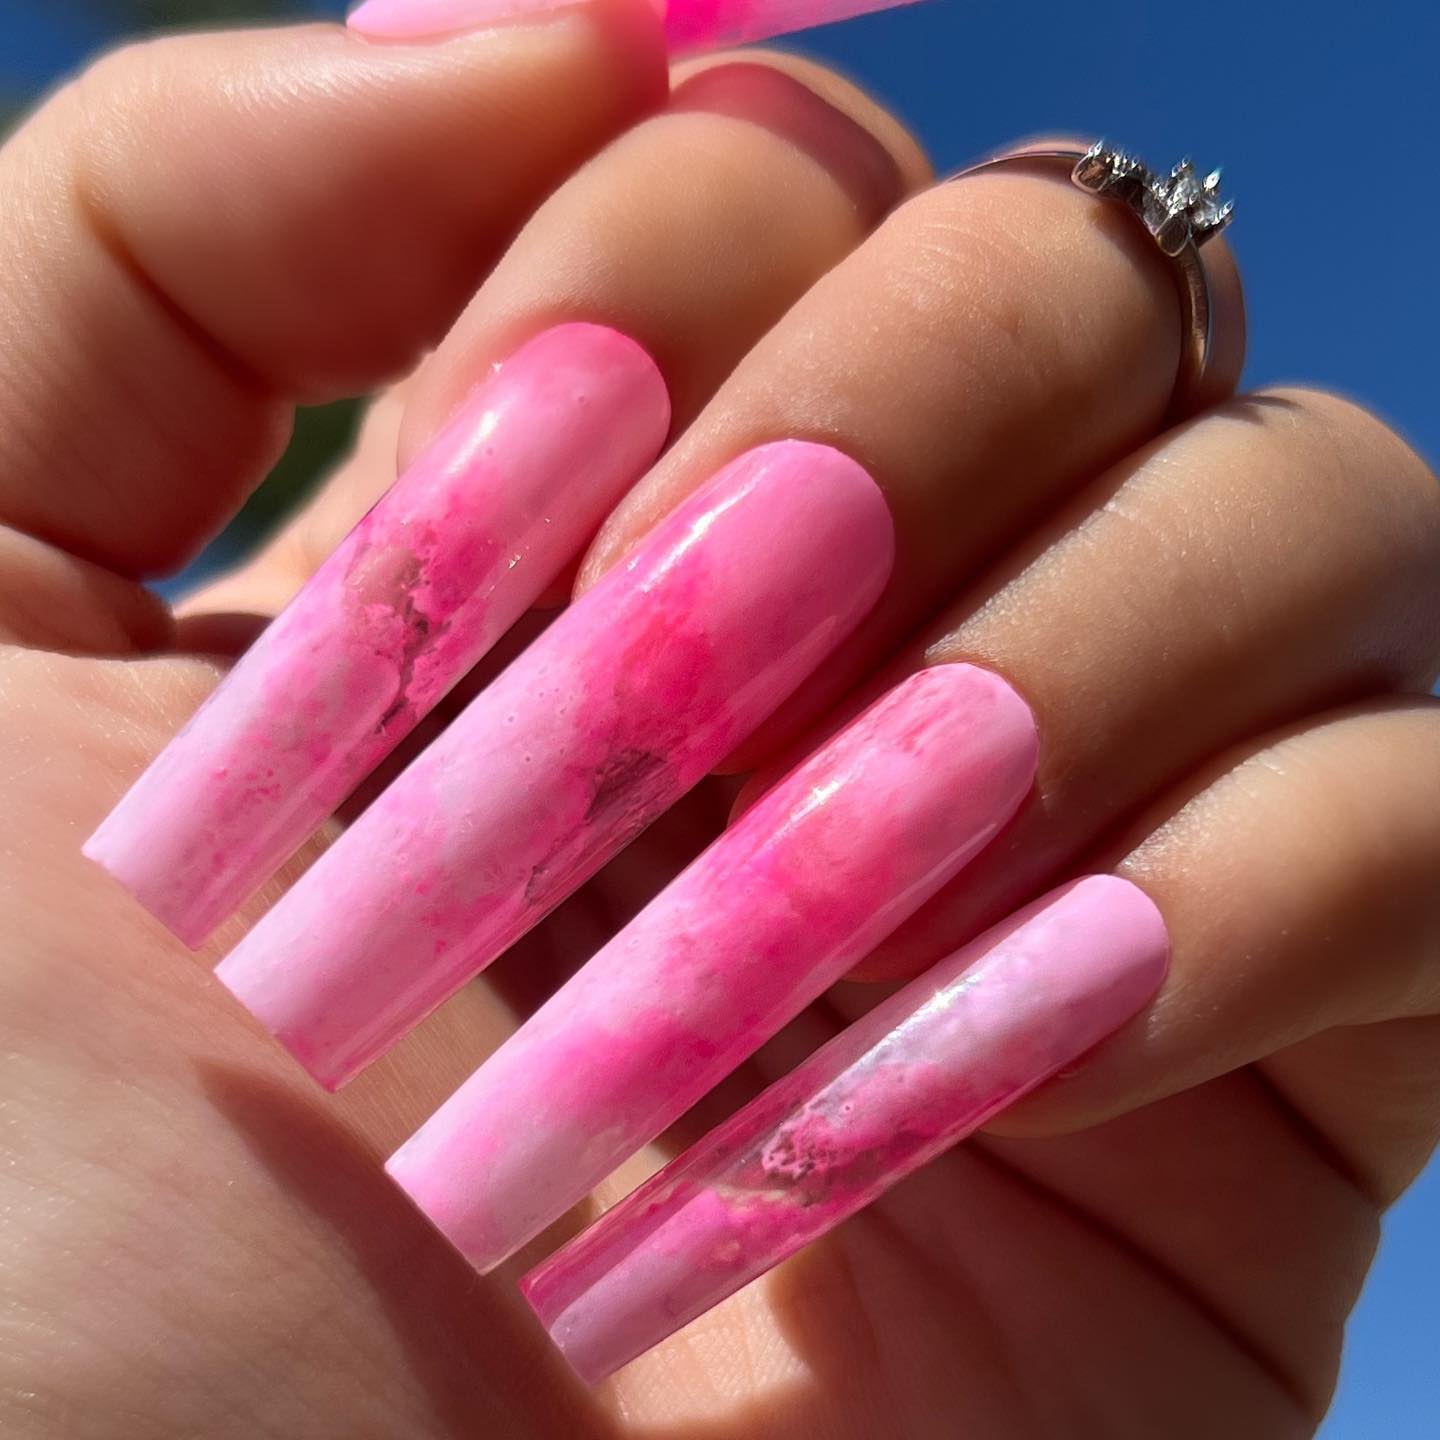 Bright pink and feminine acrylics such as these will look amazing on young women and those who fancy longer nails.